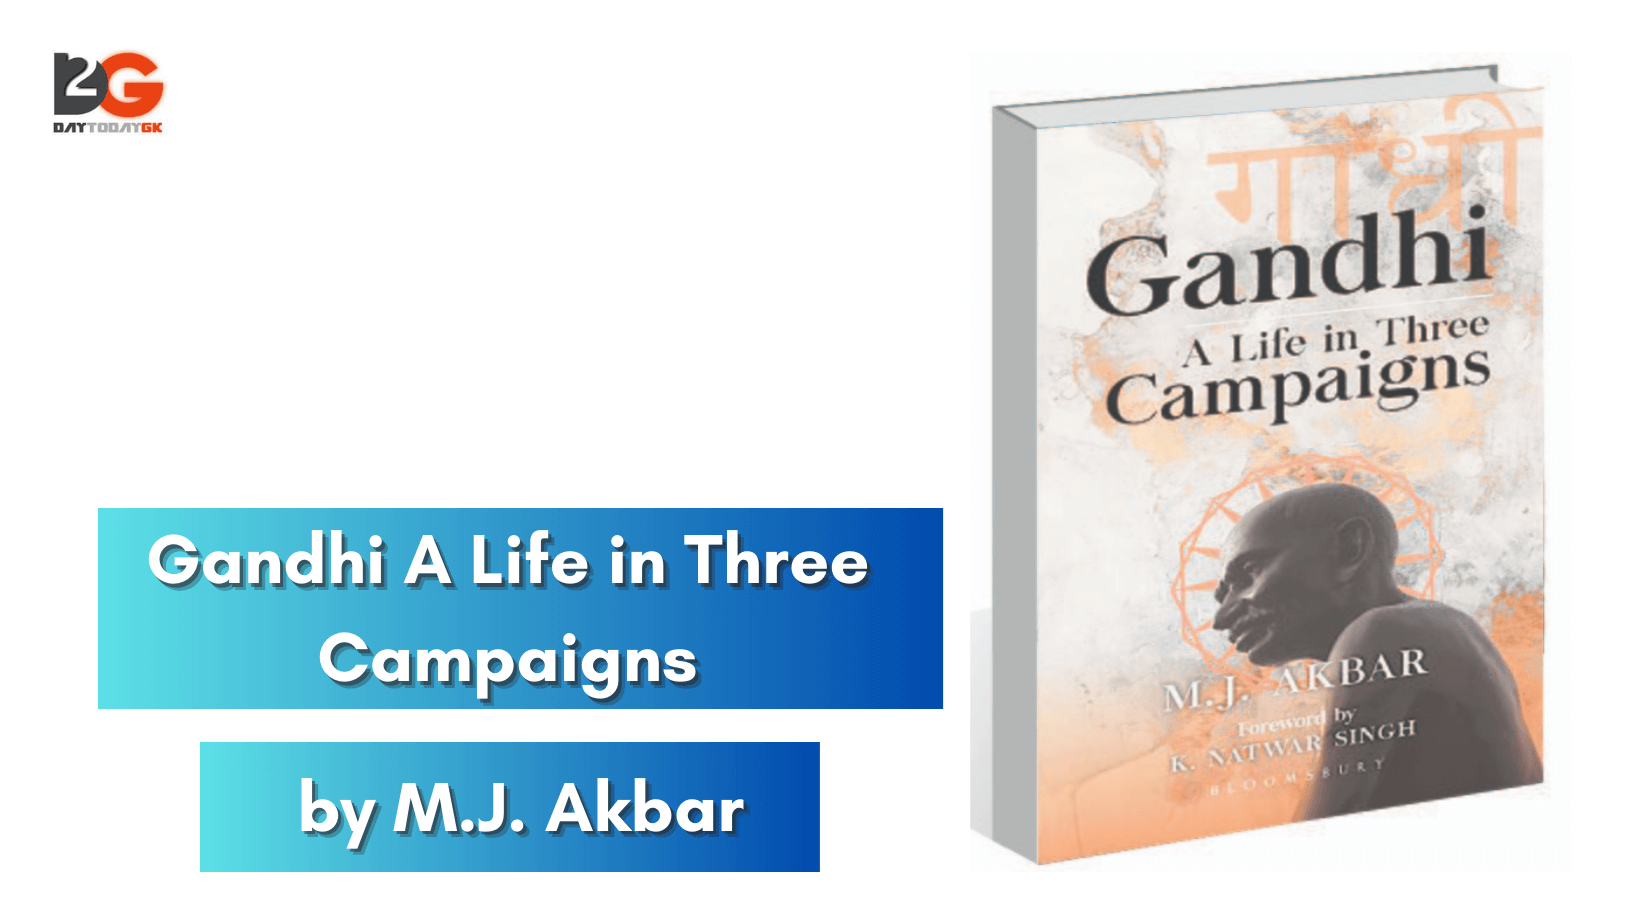 “Gandhi A Life in Three Campaigns” book launched by M.J. Akbar